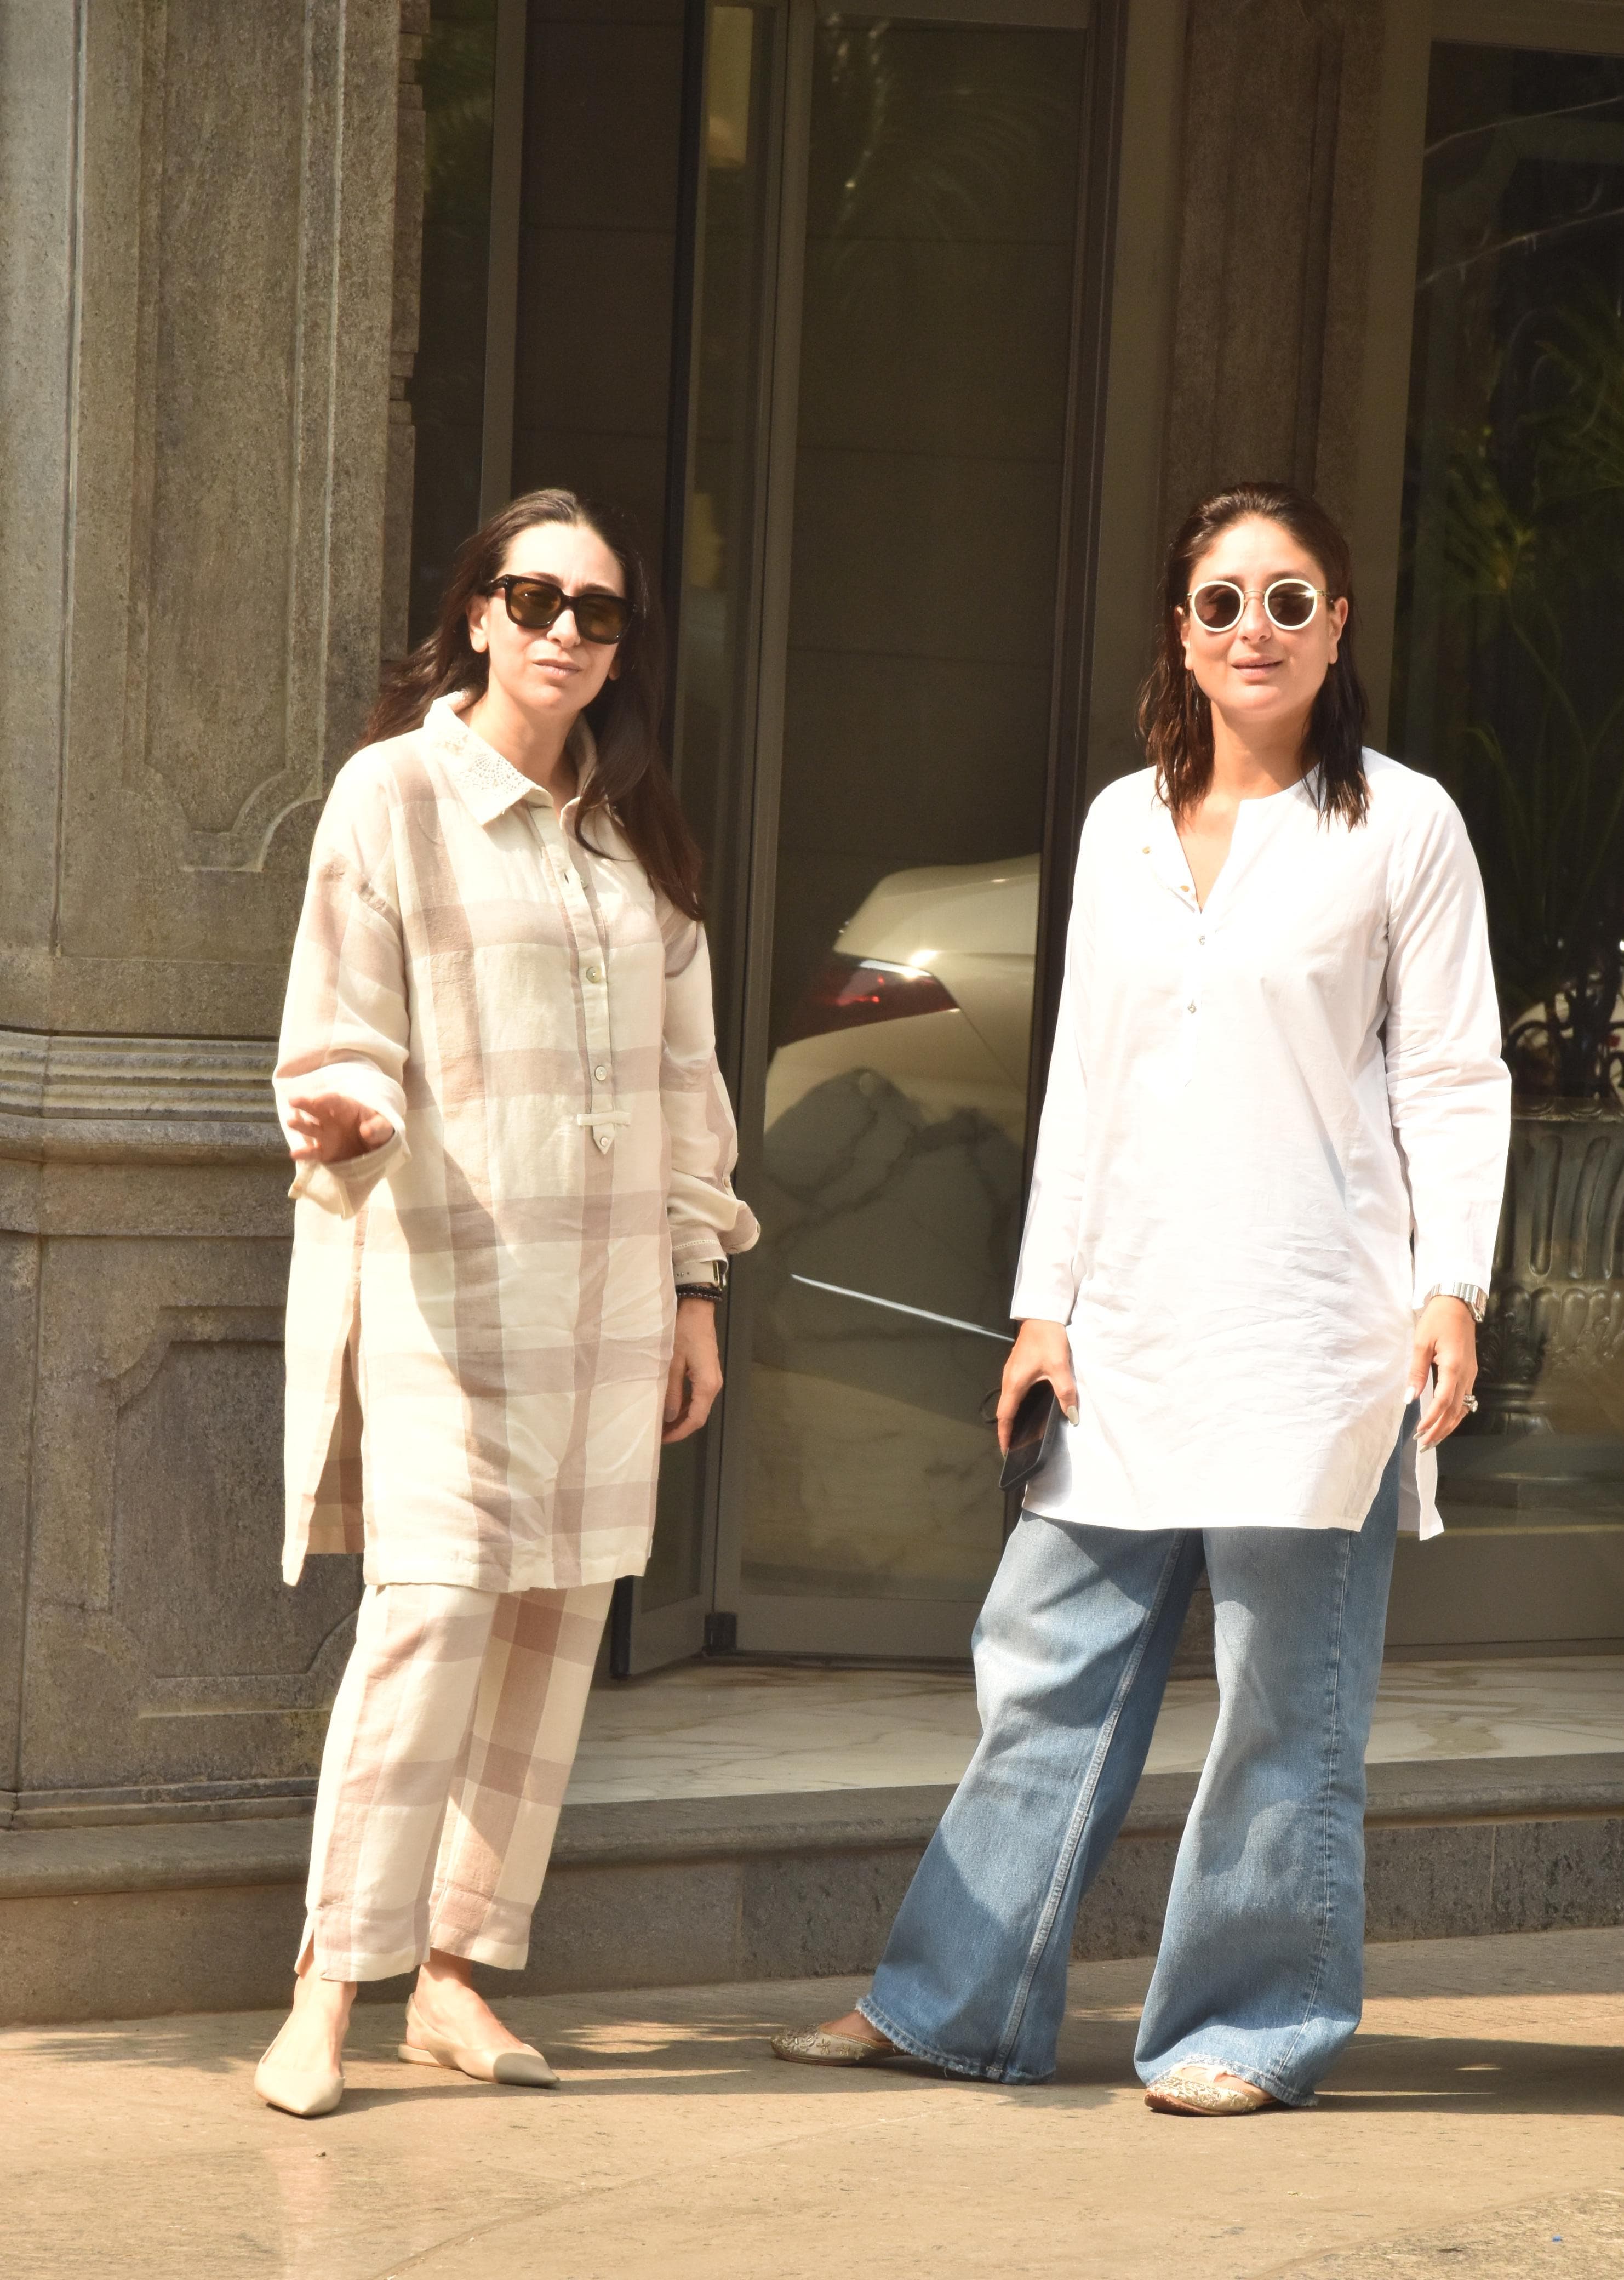 The Kapoor sisters Kareena and Karisma were snapped together as they went out and about